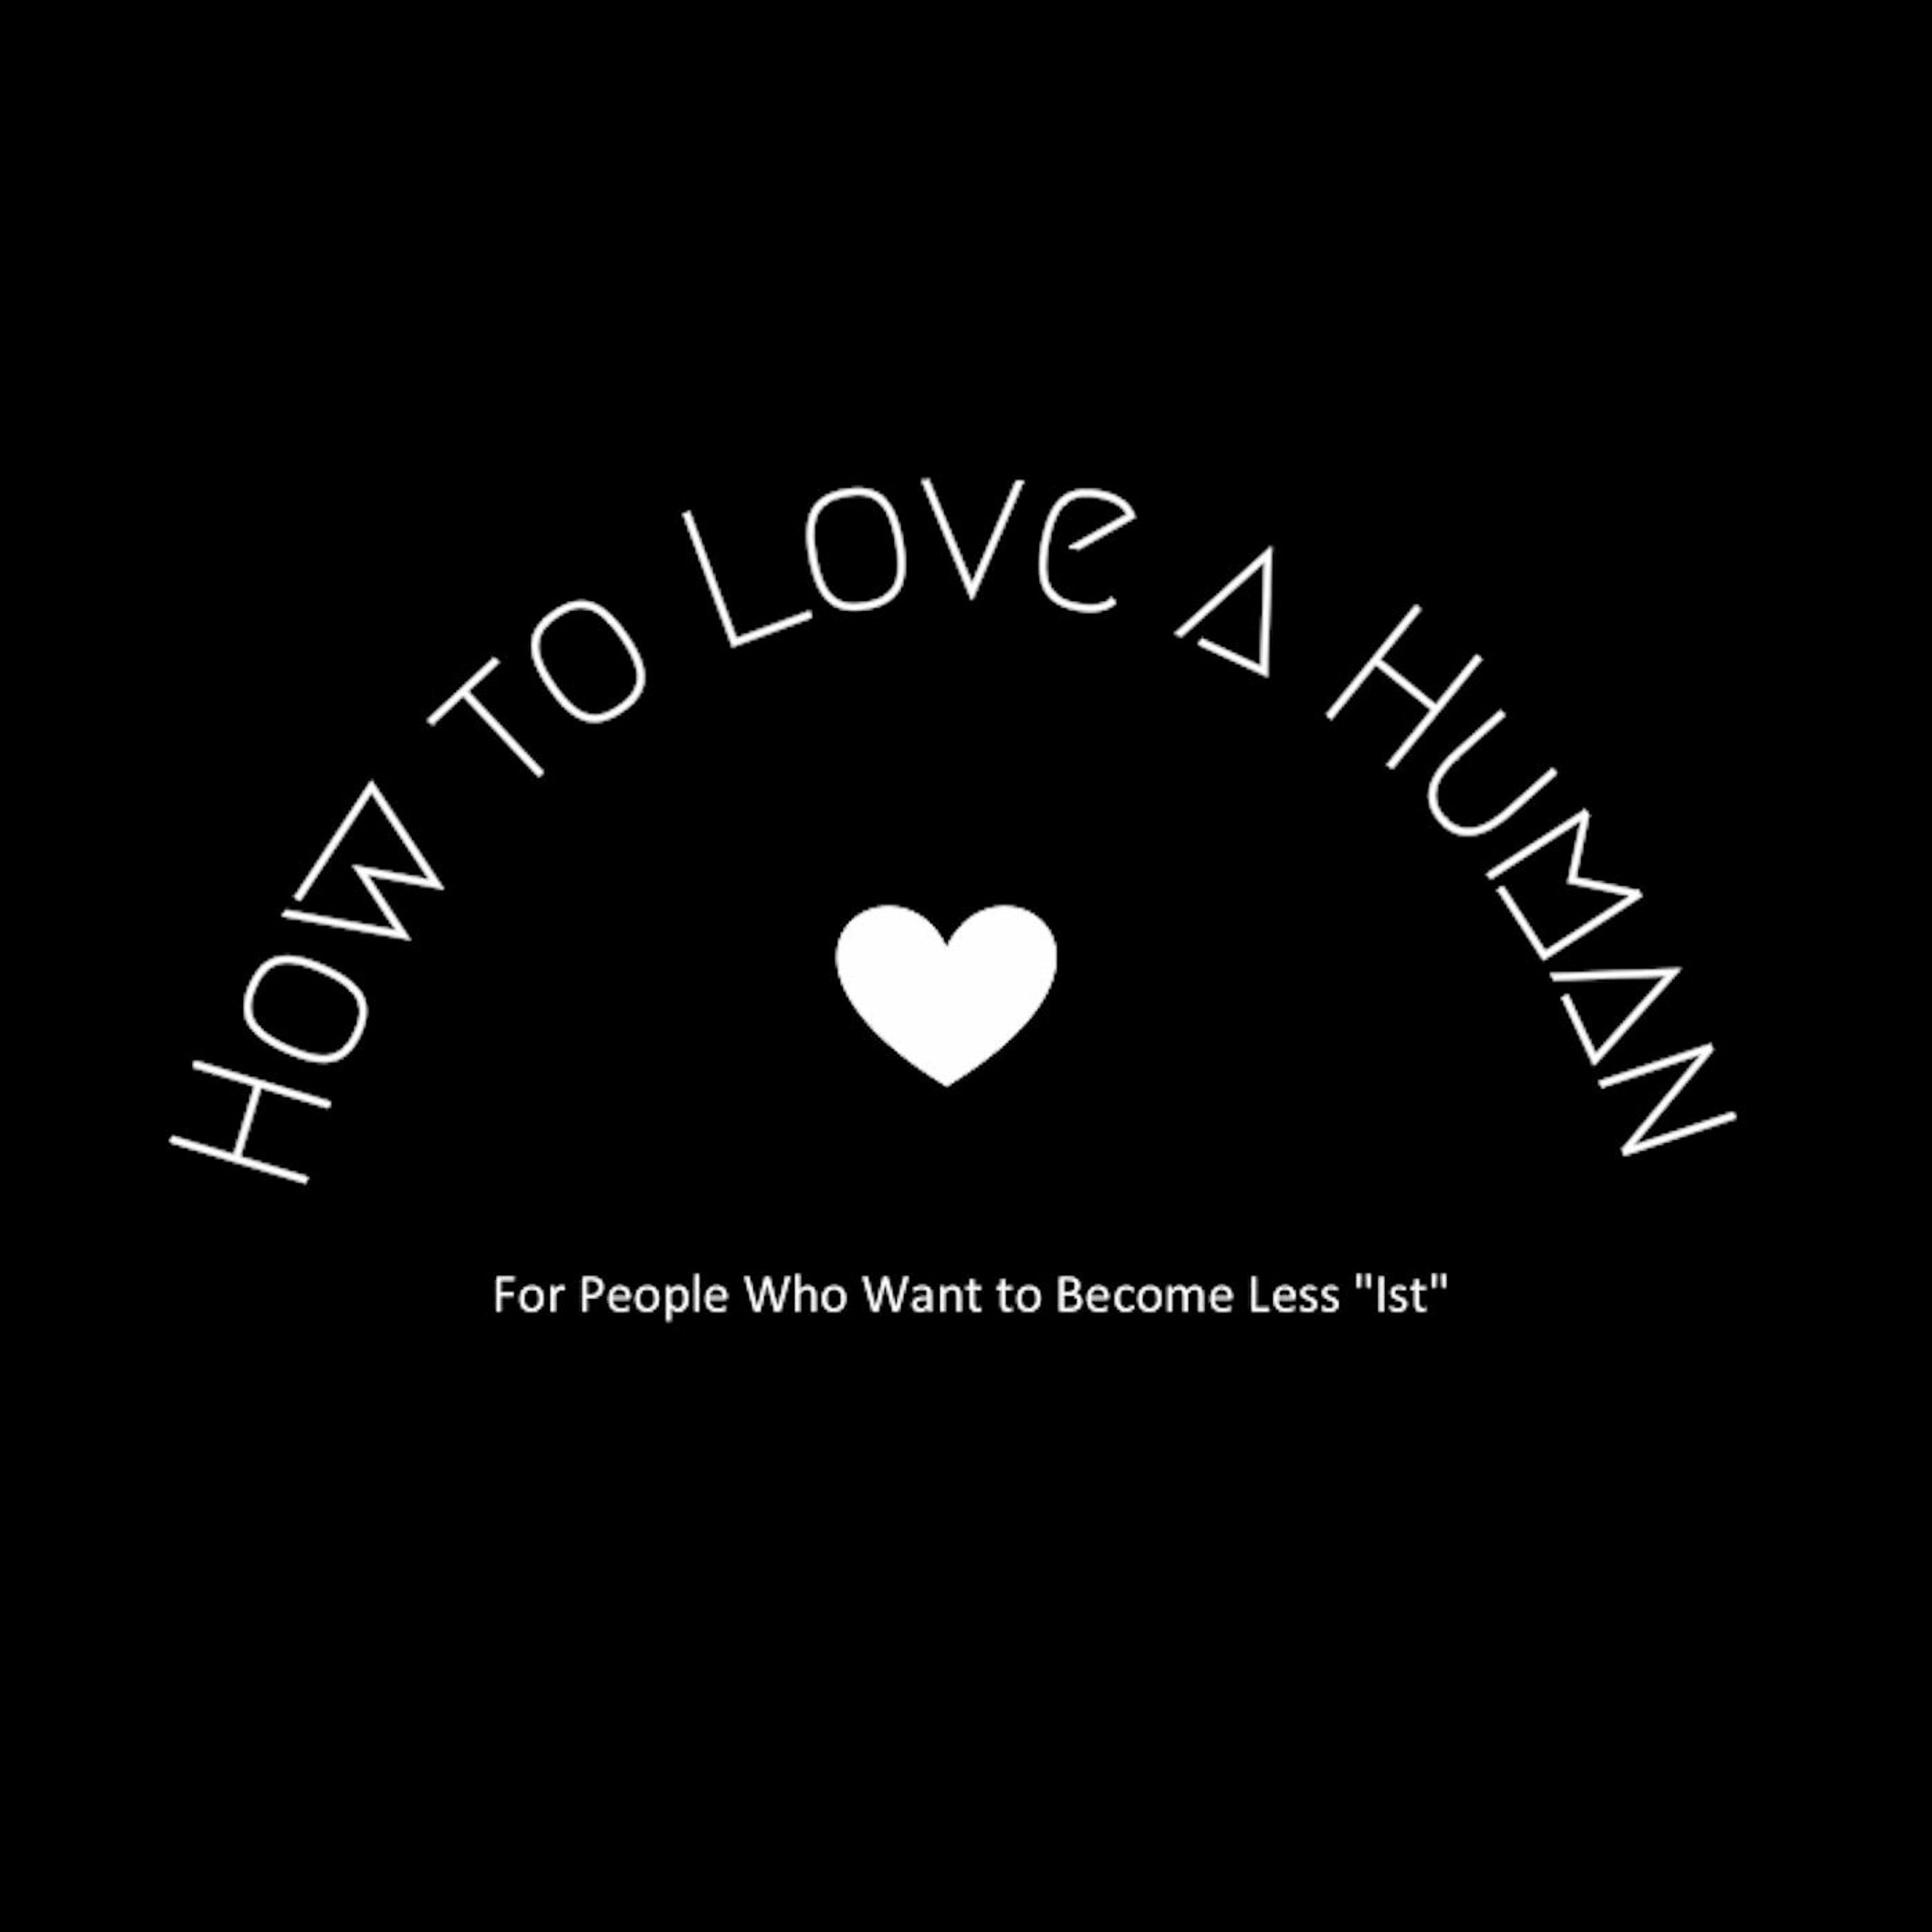 How to Love a Human Episode 11 - Lamisha